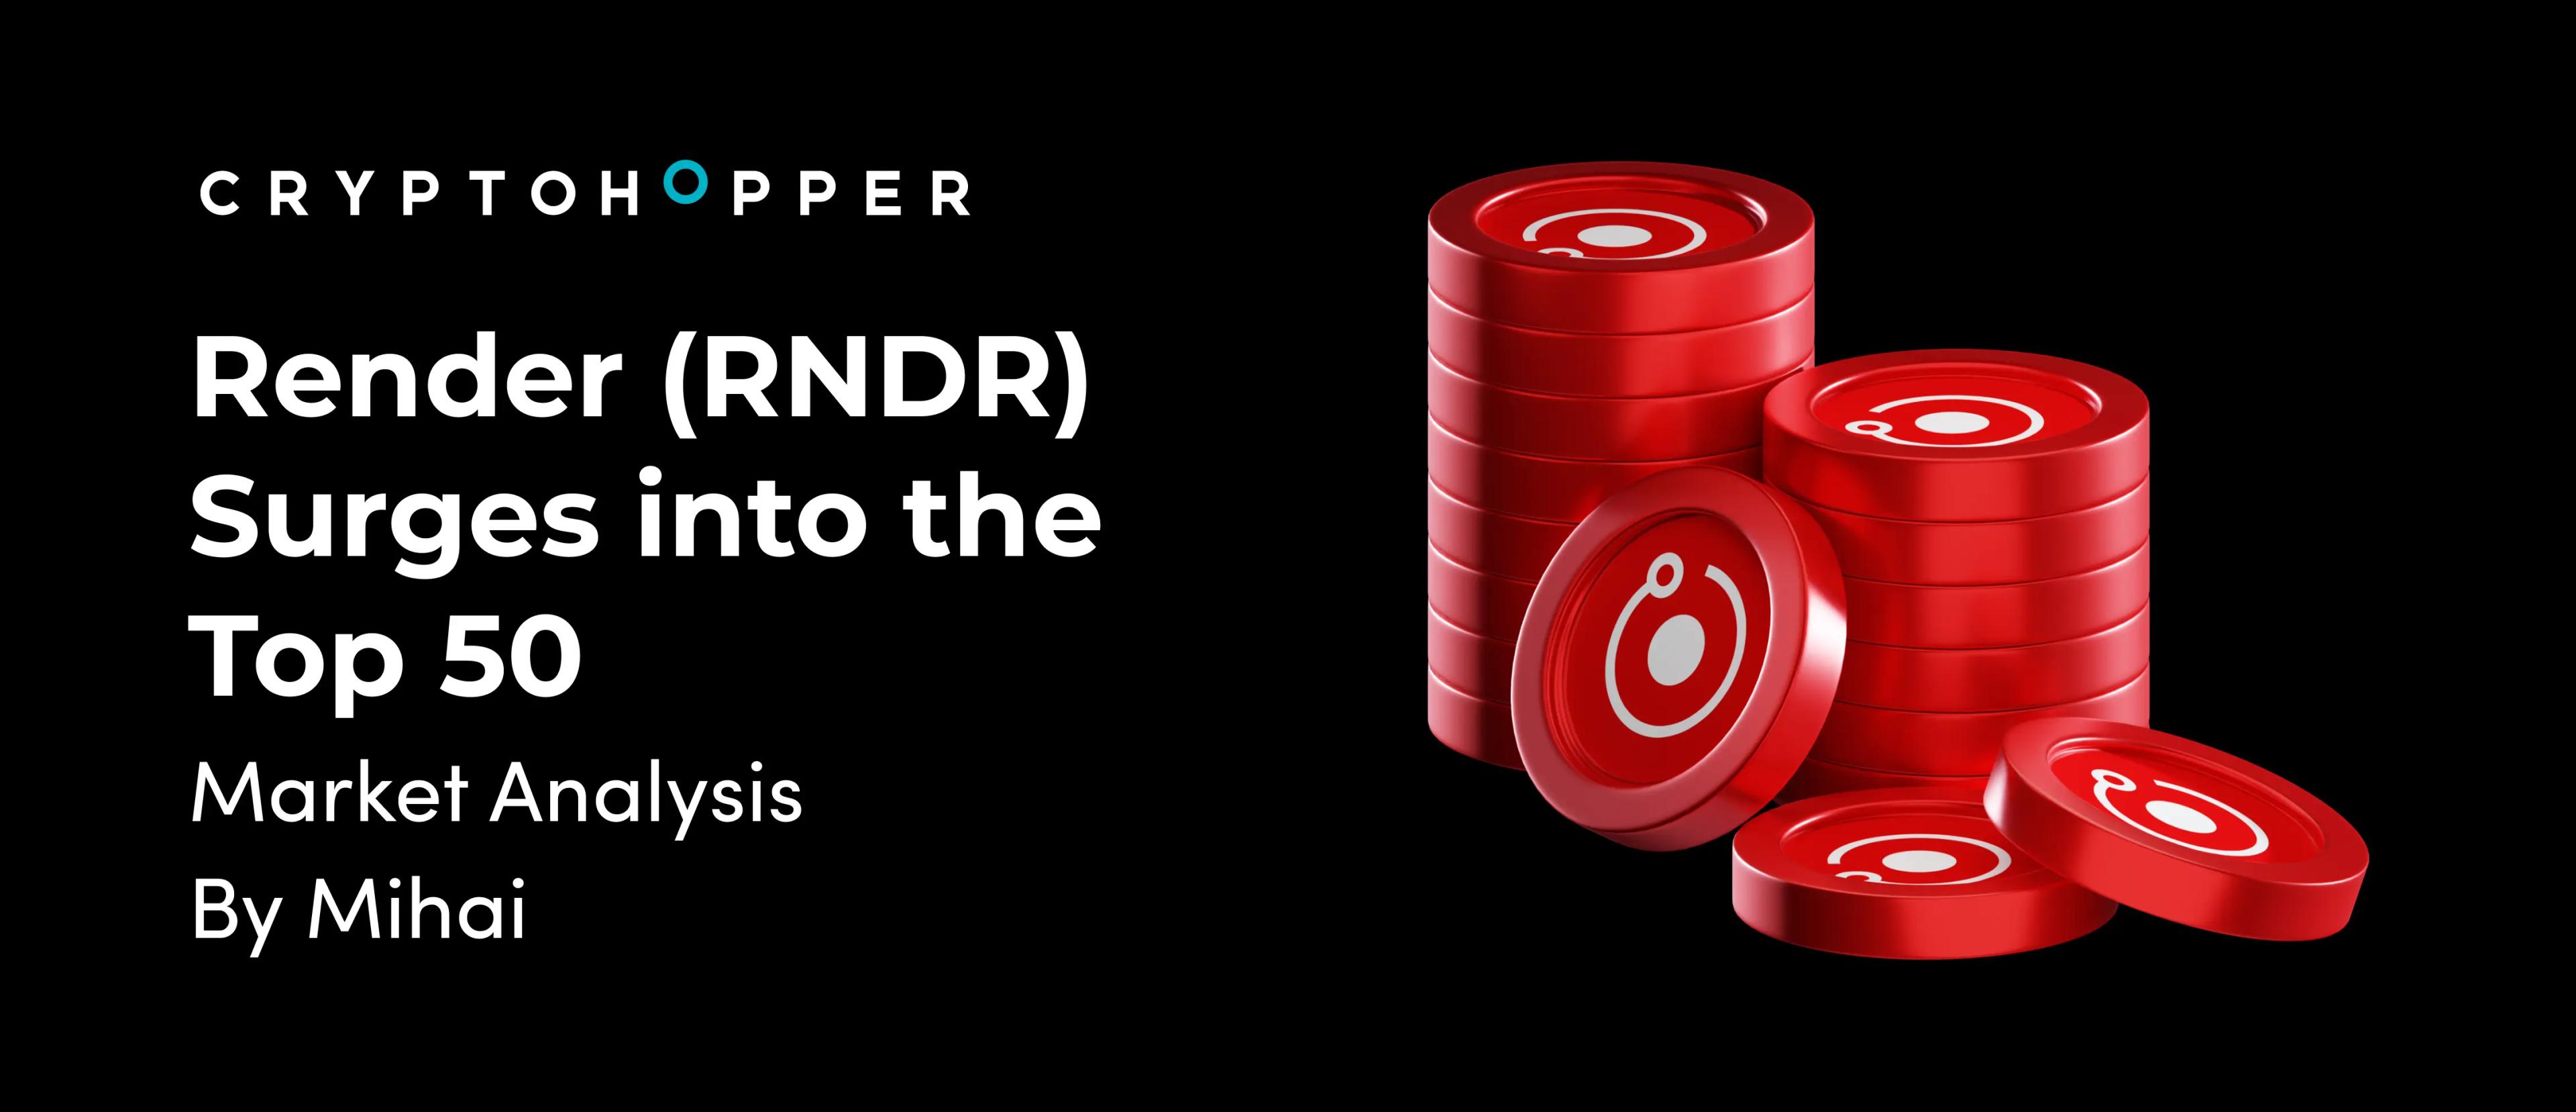 Render (RNDR) Surges into the Top 50 with a 1,100% Price Spike